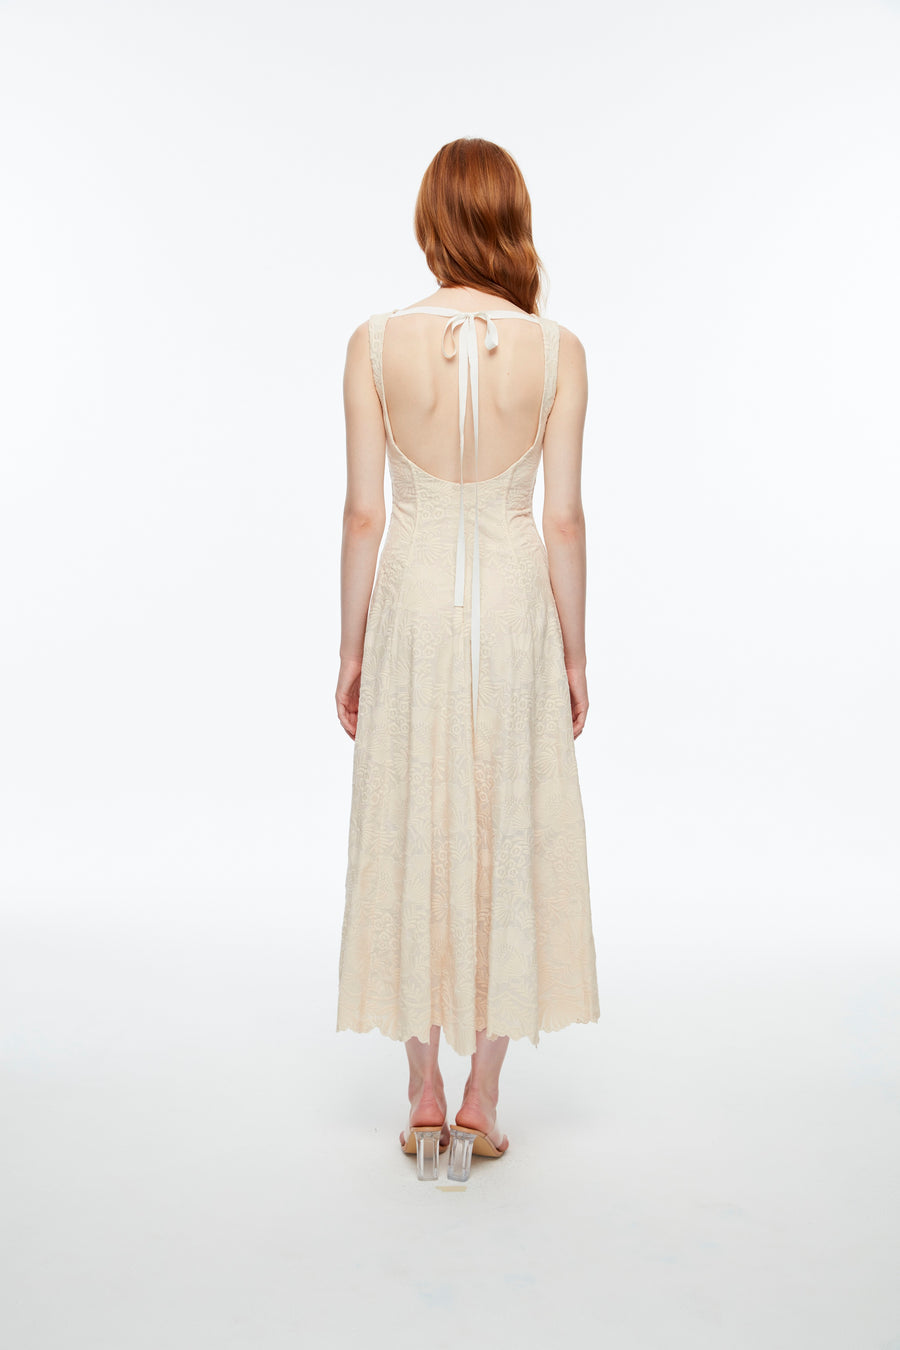 Long woven dress with floral pattern in cream